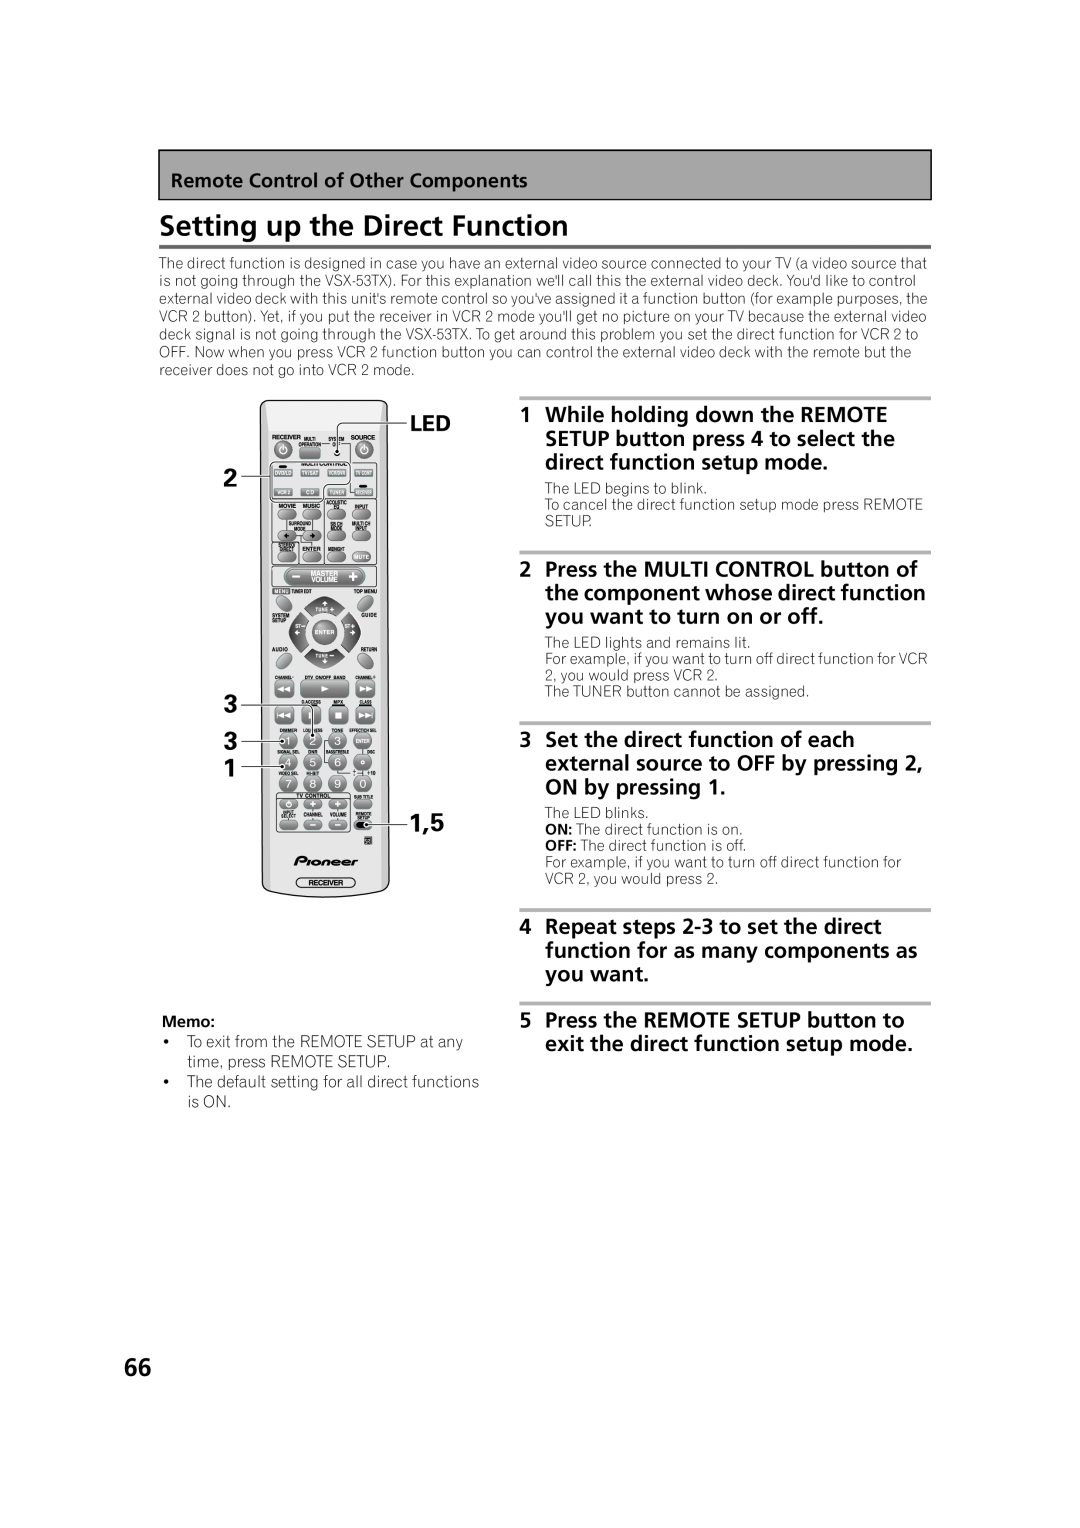 Pioneer VSX-53TX manual Setting up the Direct Function, Remote Control of Other Components 